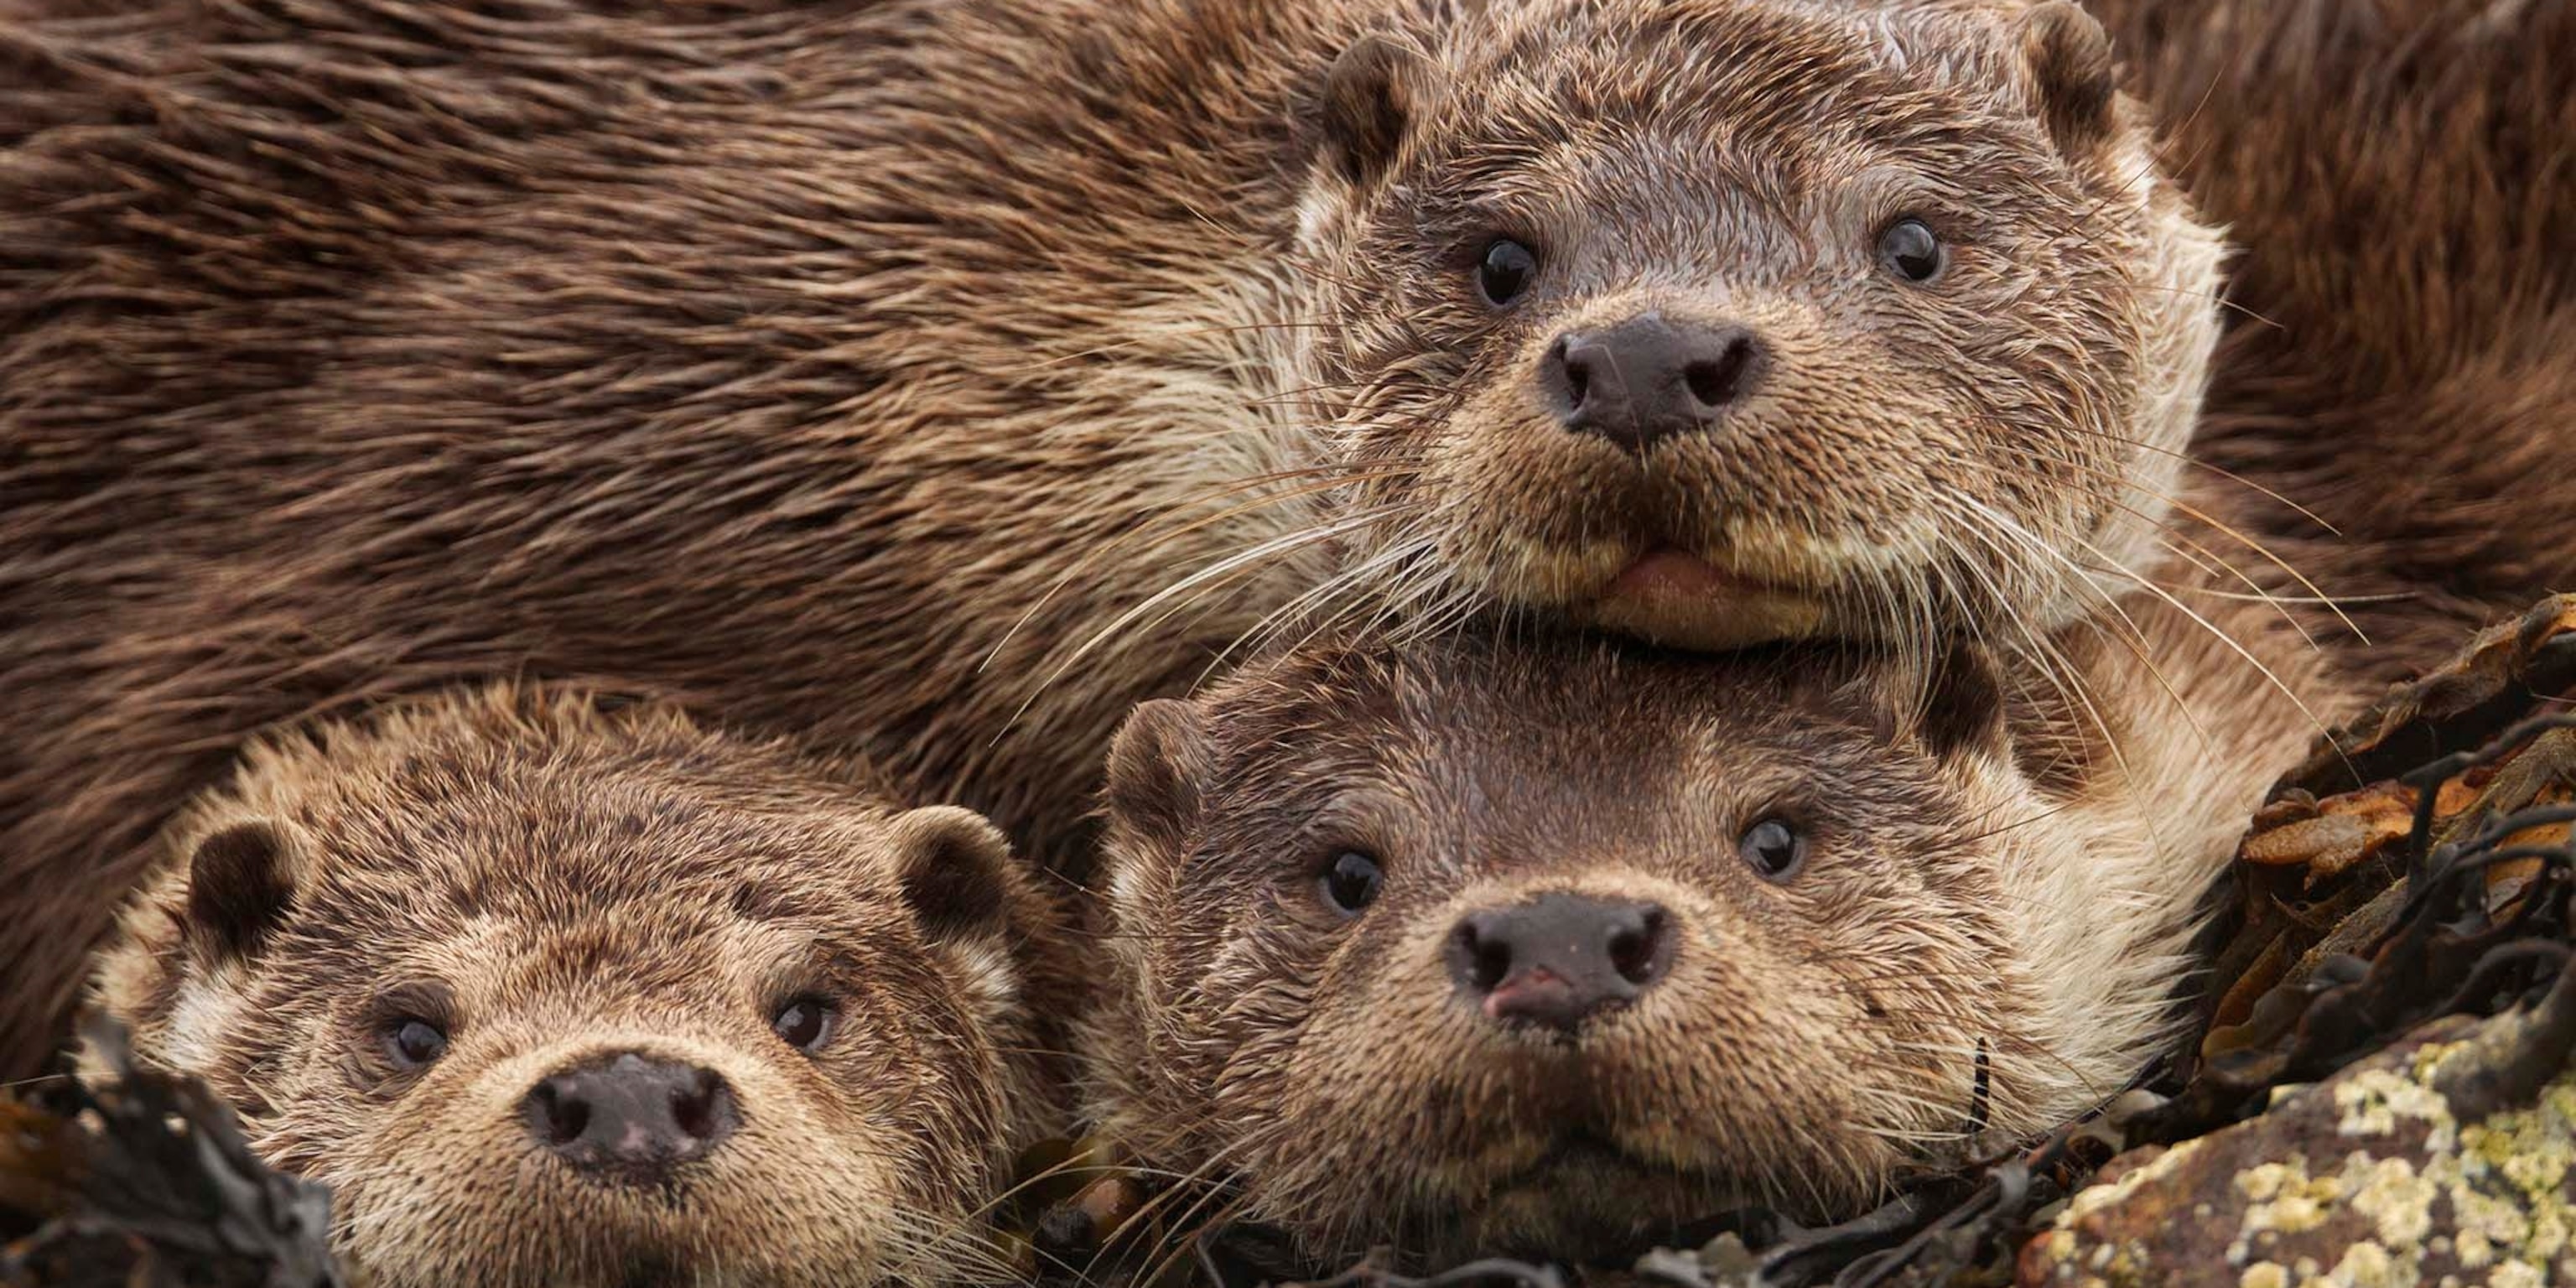 Why is a sea otter called a family?